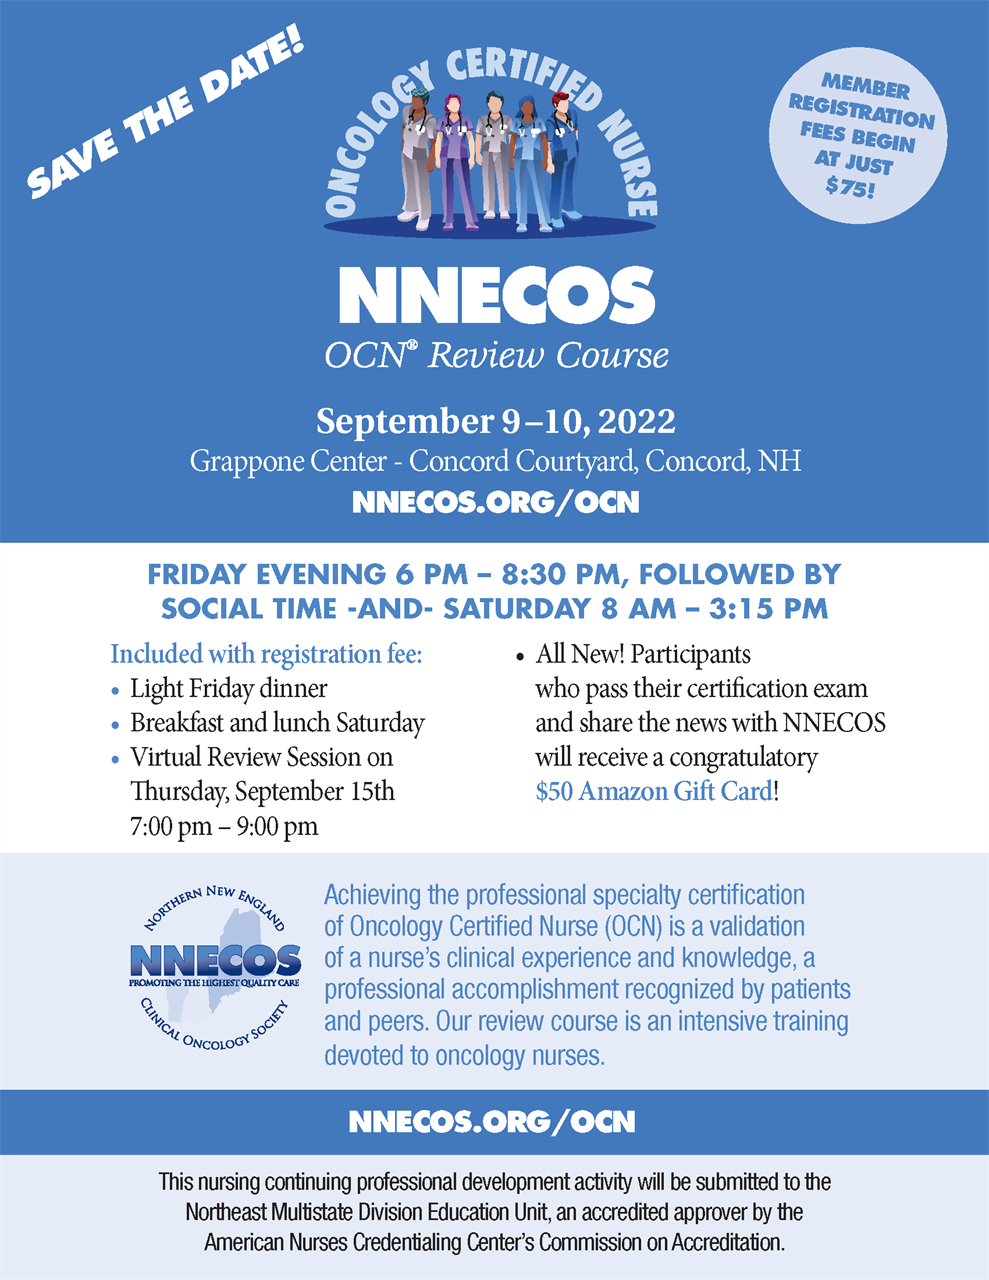 NNECOS OCN Review Course - Save the Date